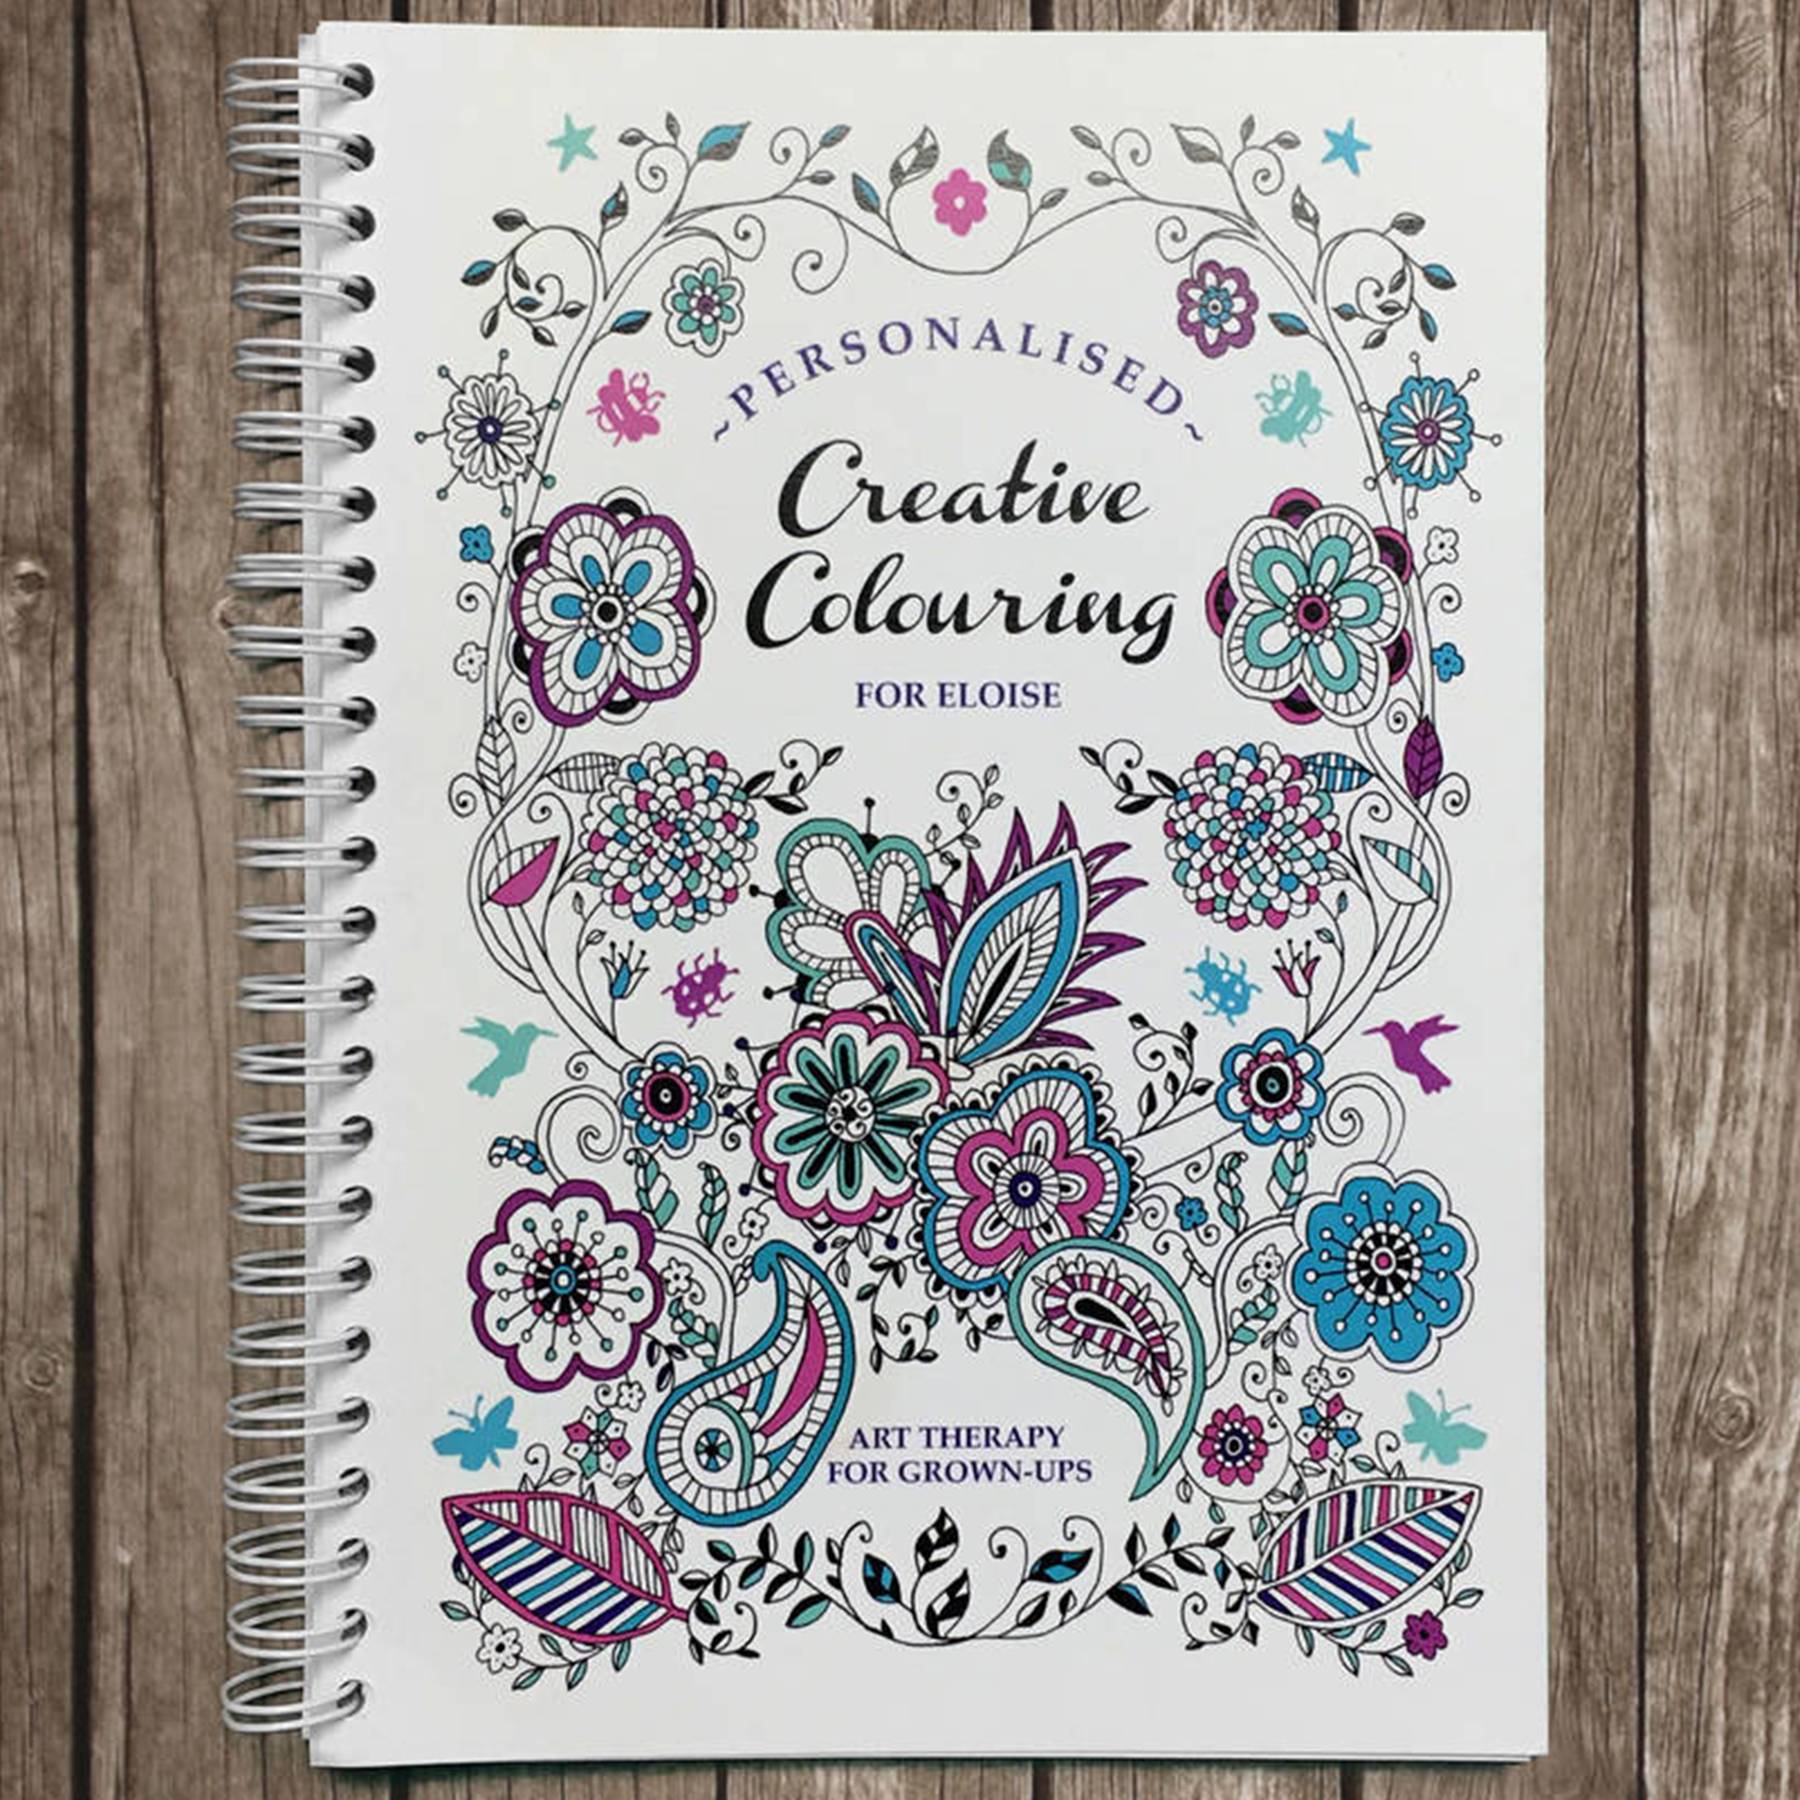 Download 15 Best Adult Colouring Books To Ease Your Anxiety In Lockdown Glamour Uk